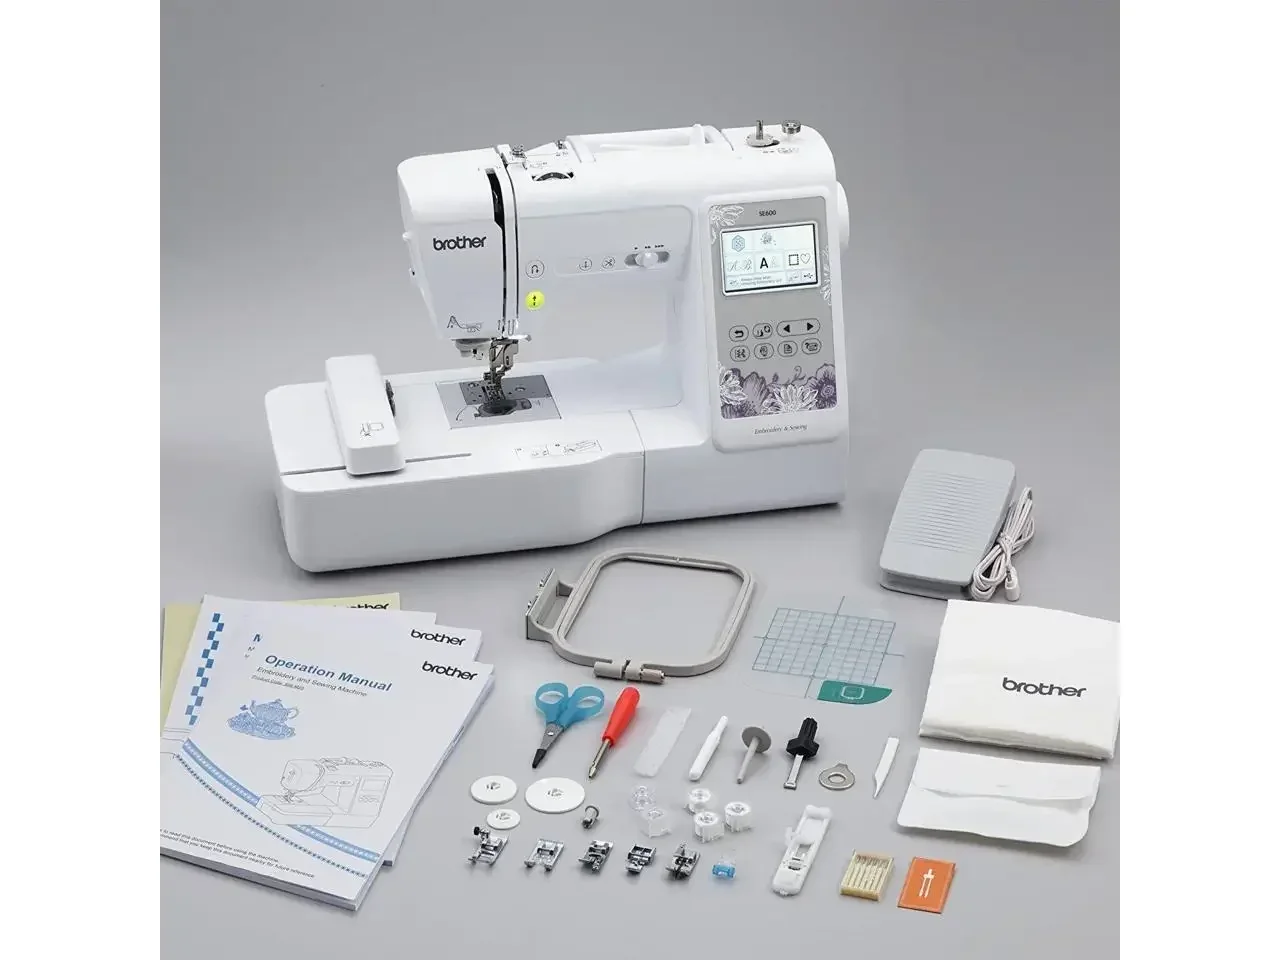 

SUMMER SALES DISCOUNT ON Buy With Confidence New Original Activities Brother SE600 Combination Computerized Sewing And Embroider